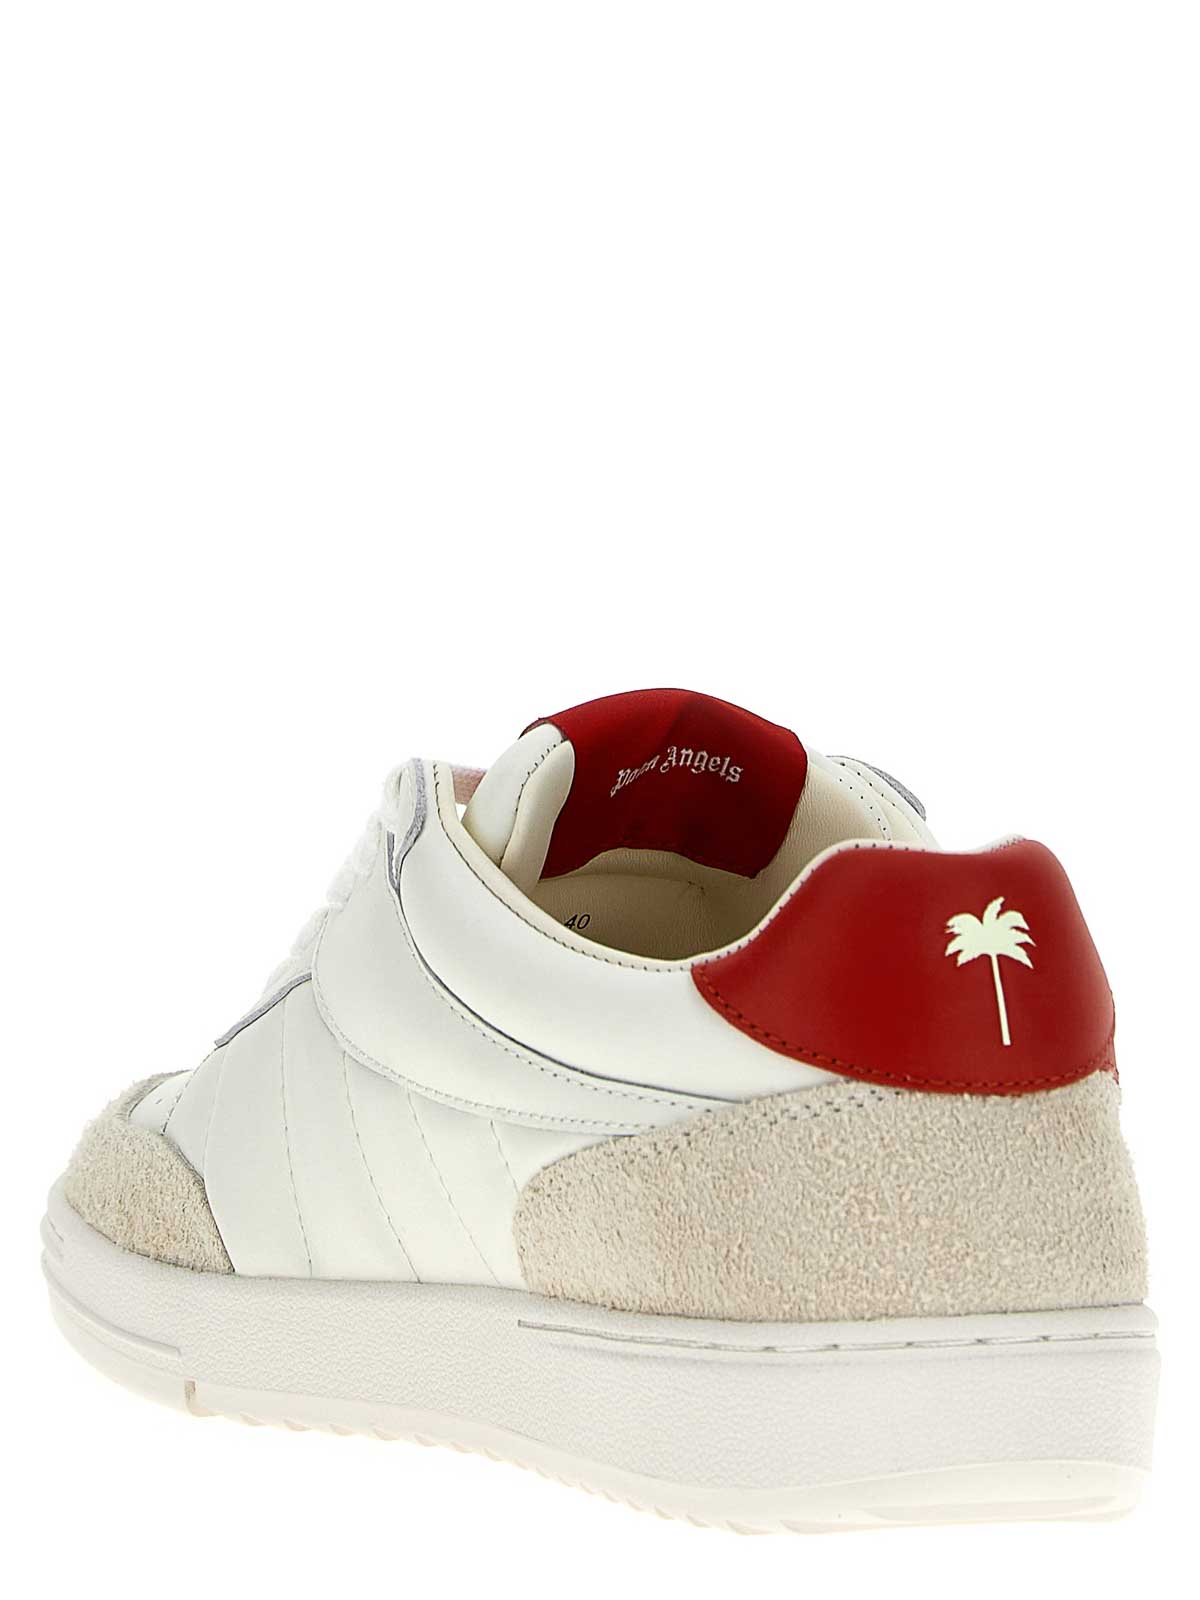 Shop Palm Angels Palm Beach University Sneakers In Red